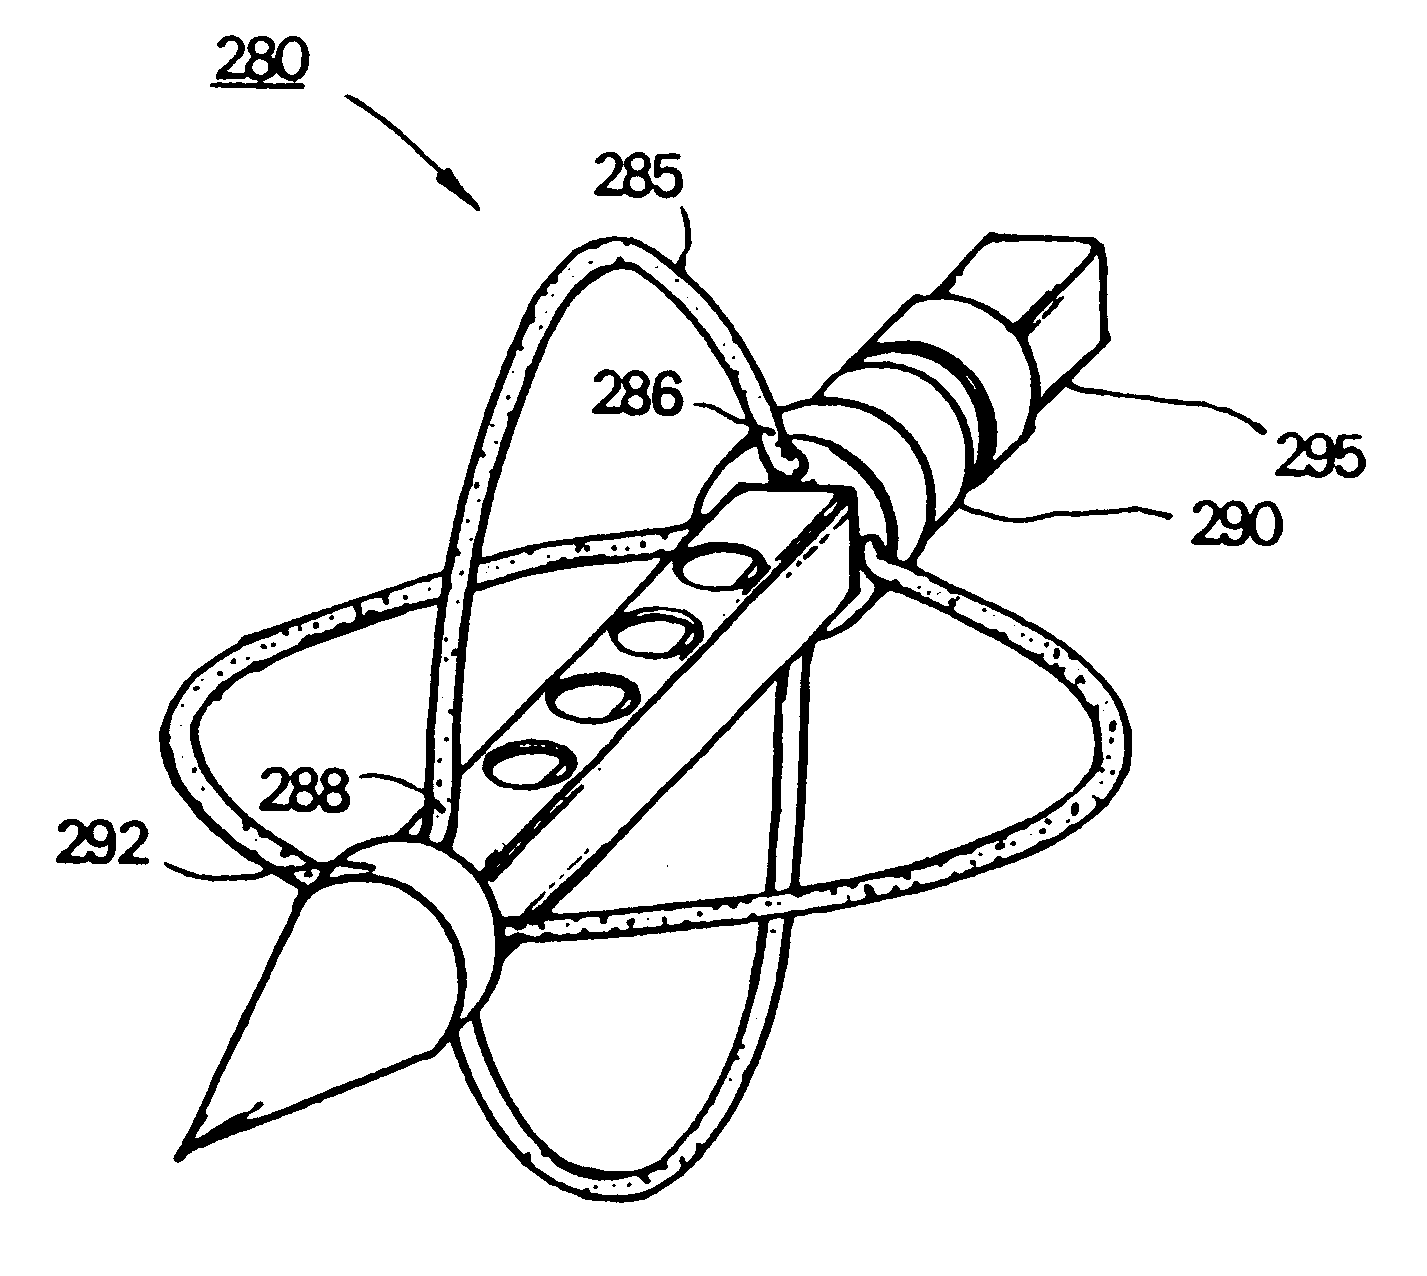 Excisional biopsy needle and method for use with image-directed technology